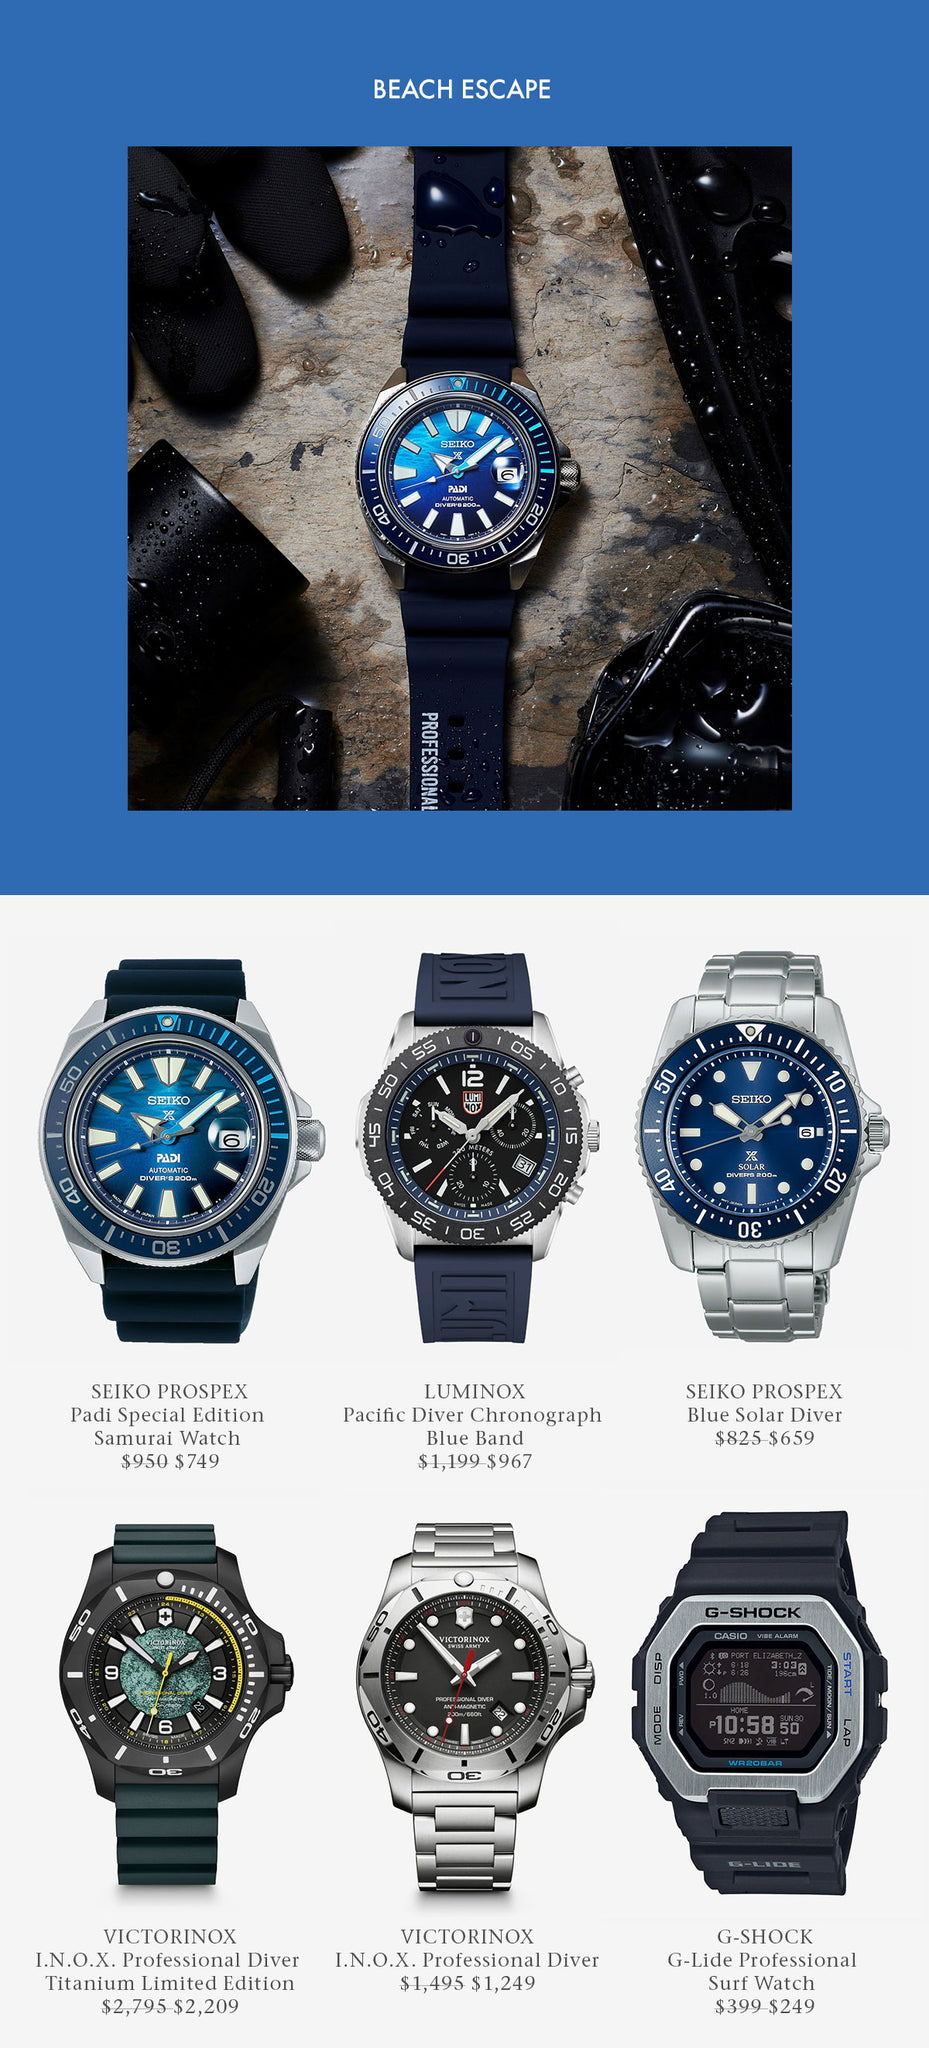 Watches perfect for the beach and diving